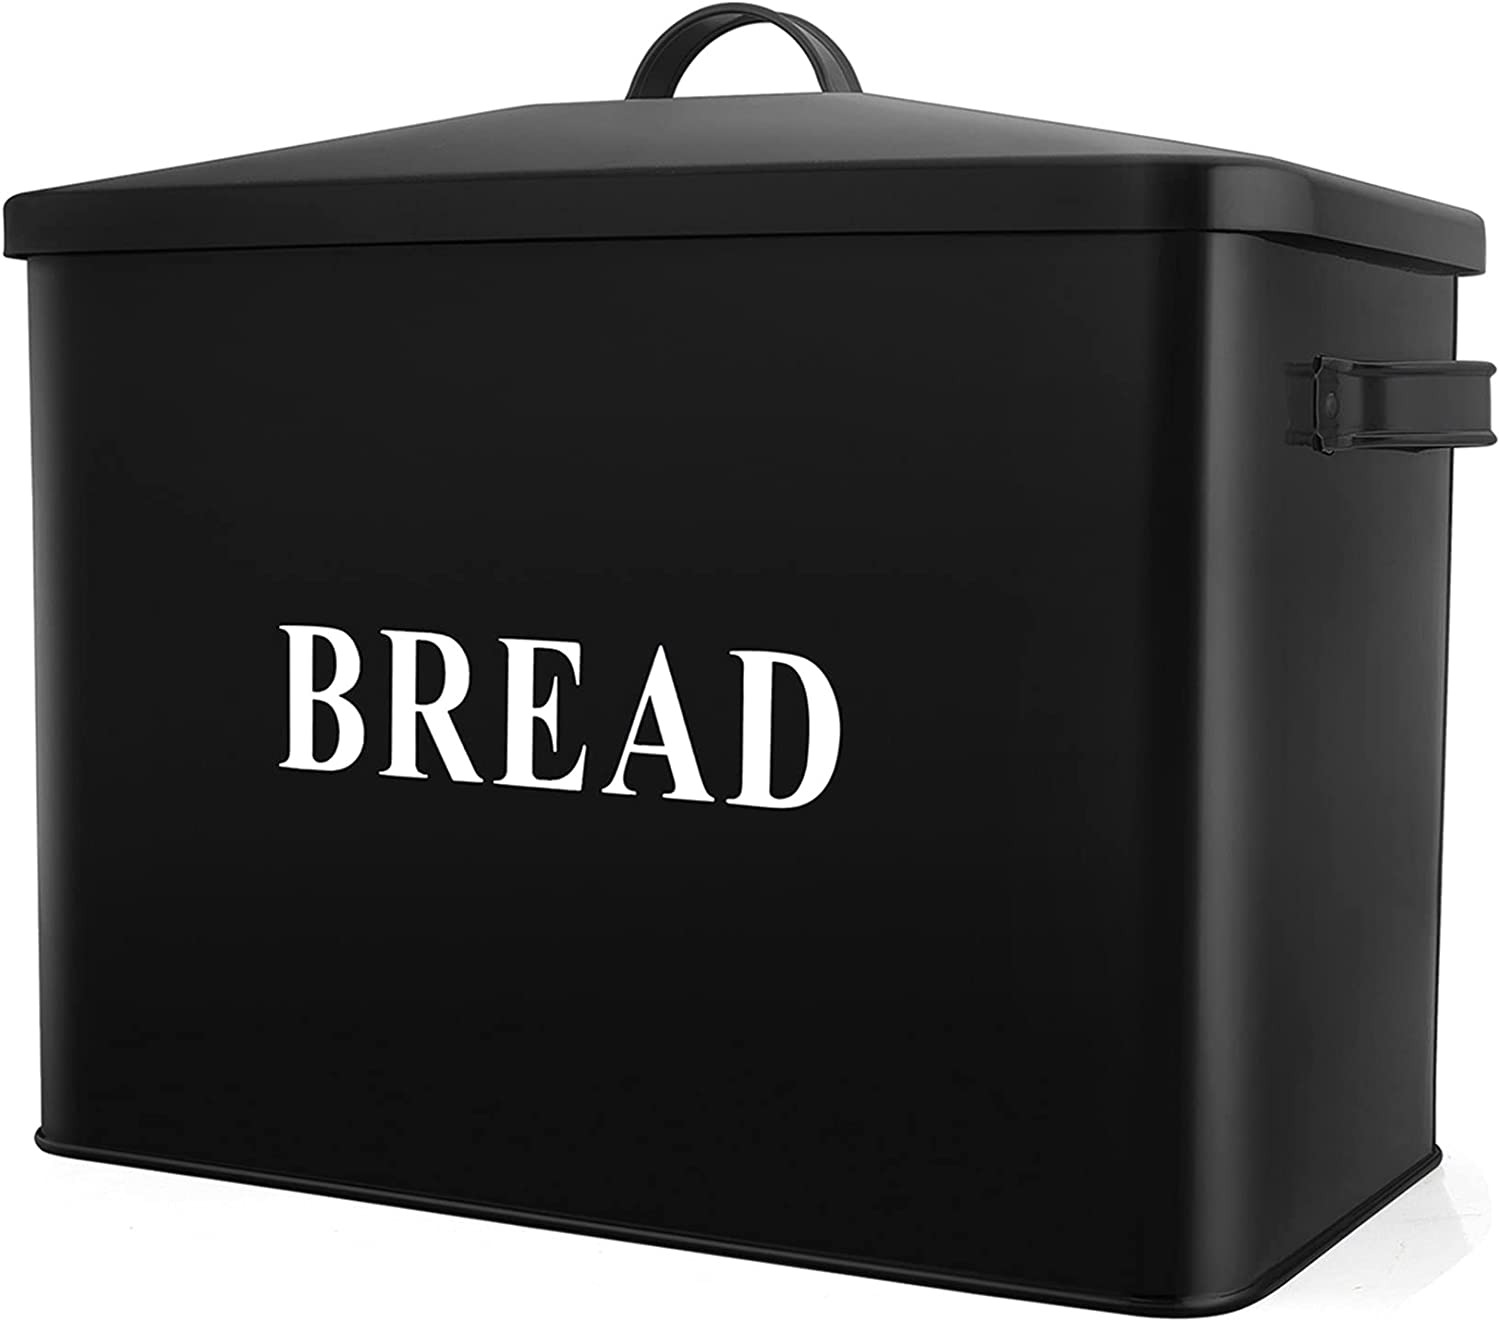 P&P CHEF Extra Large Black Bread Box with Lid, Metal Bread Storage Container for